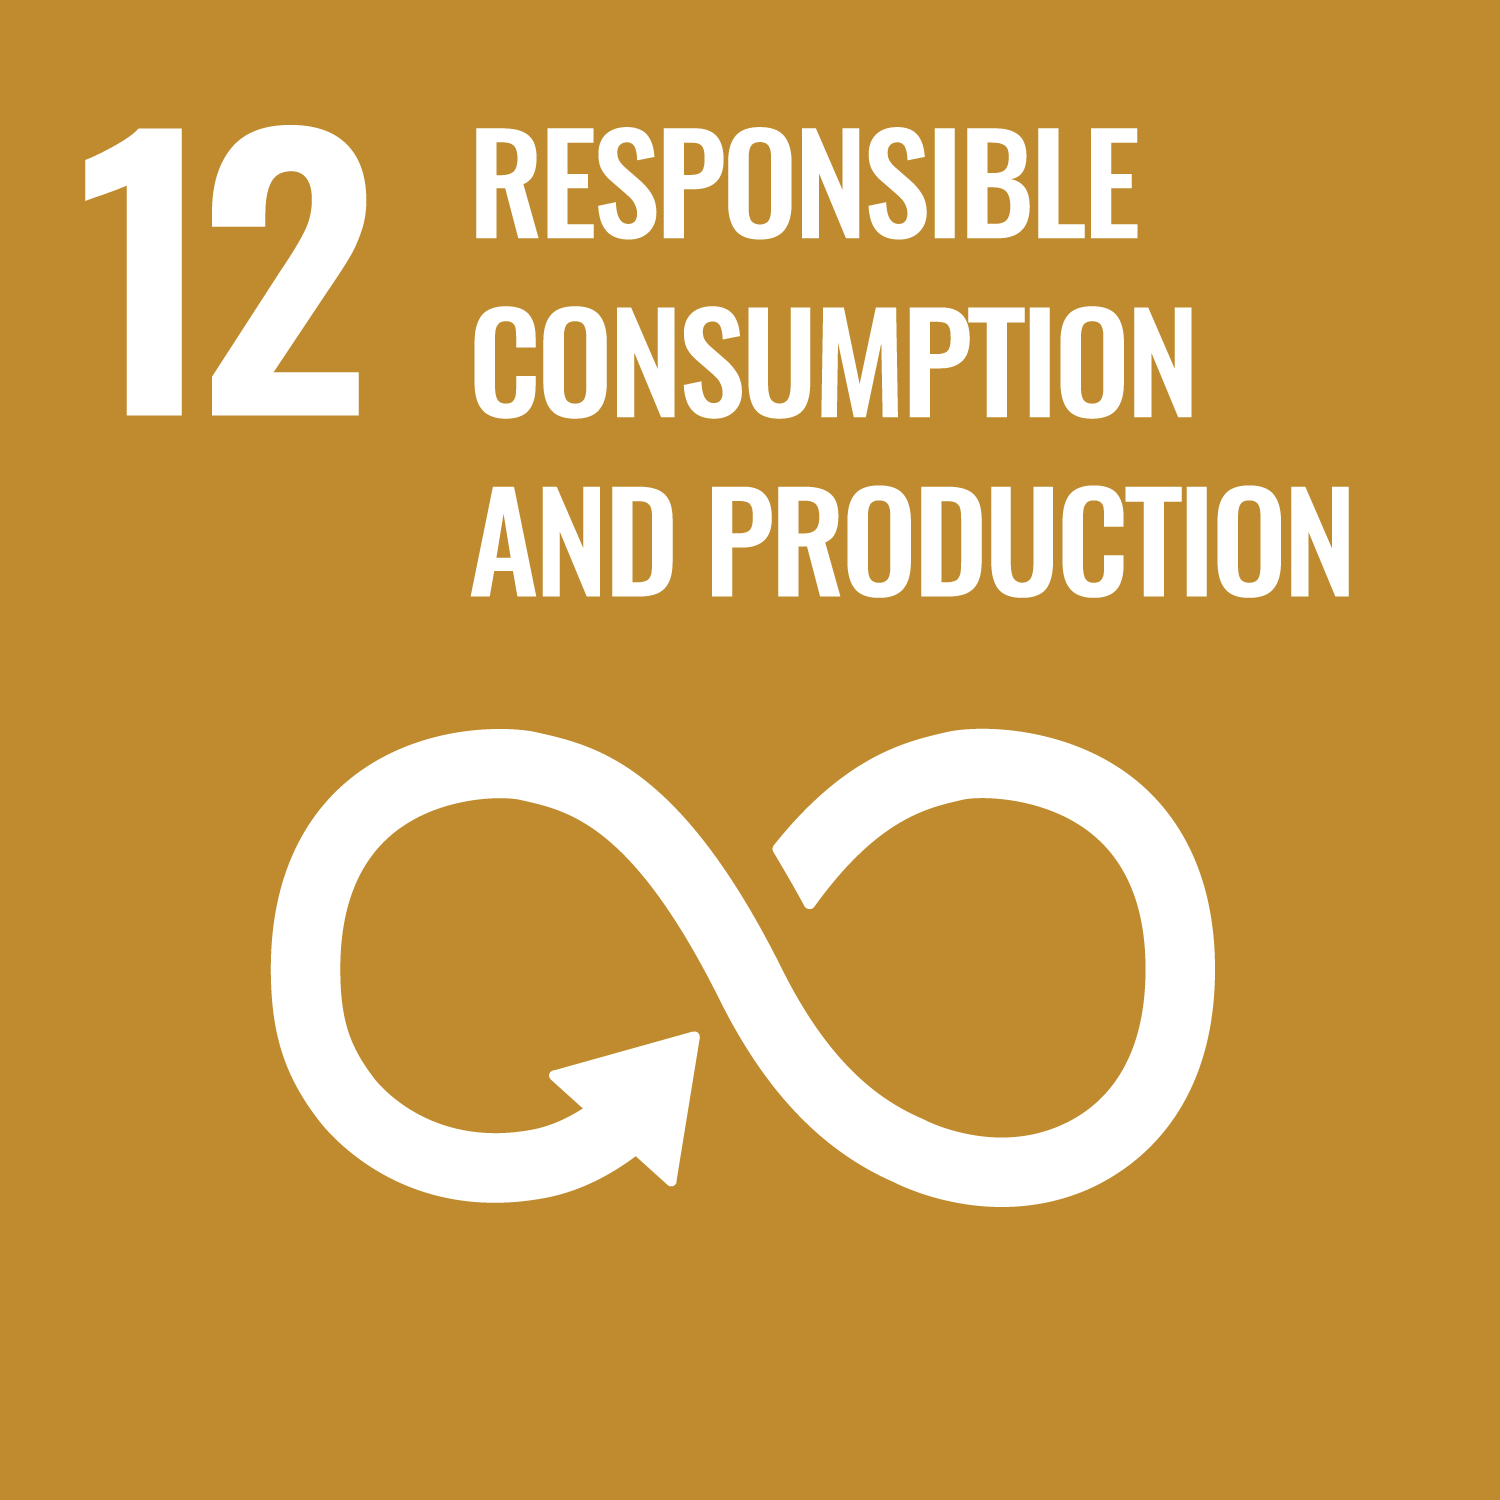 Responsible consumption and production (SDG-12)